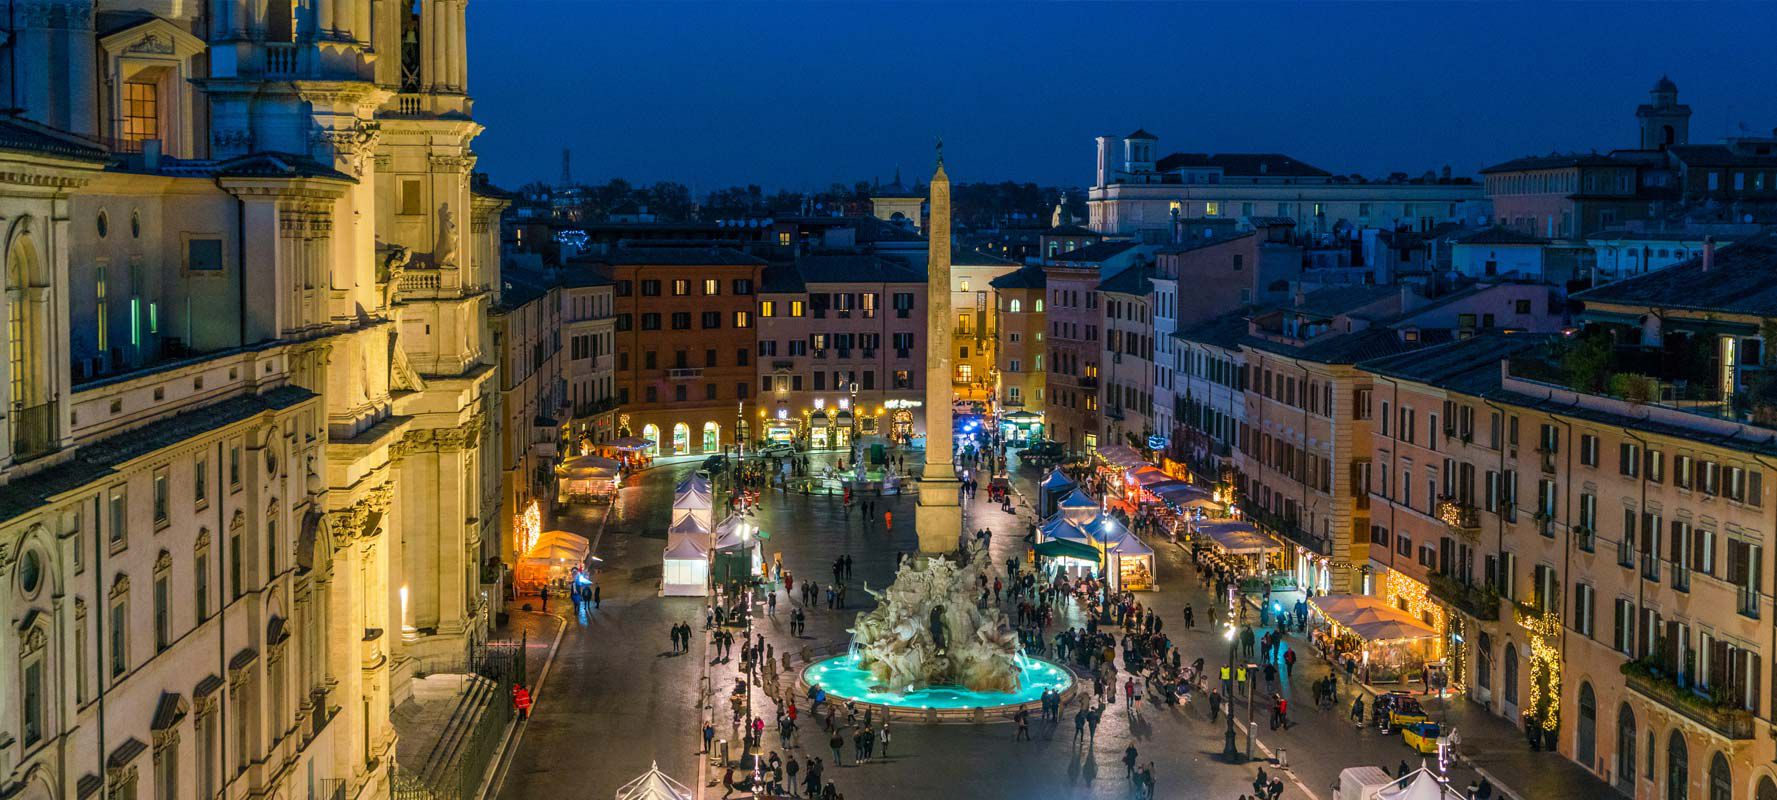 Christmas Market in Rome